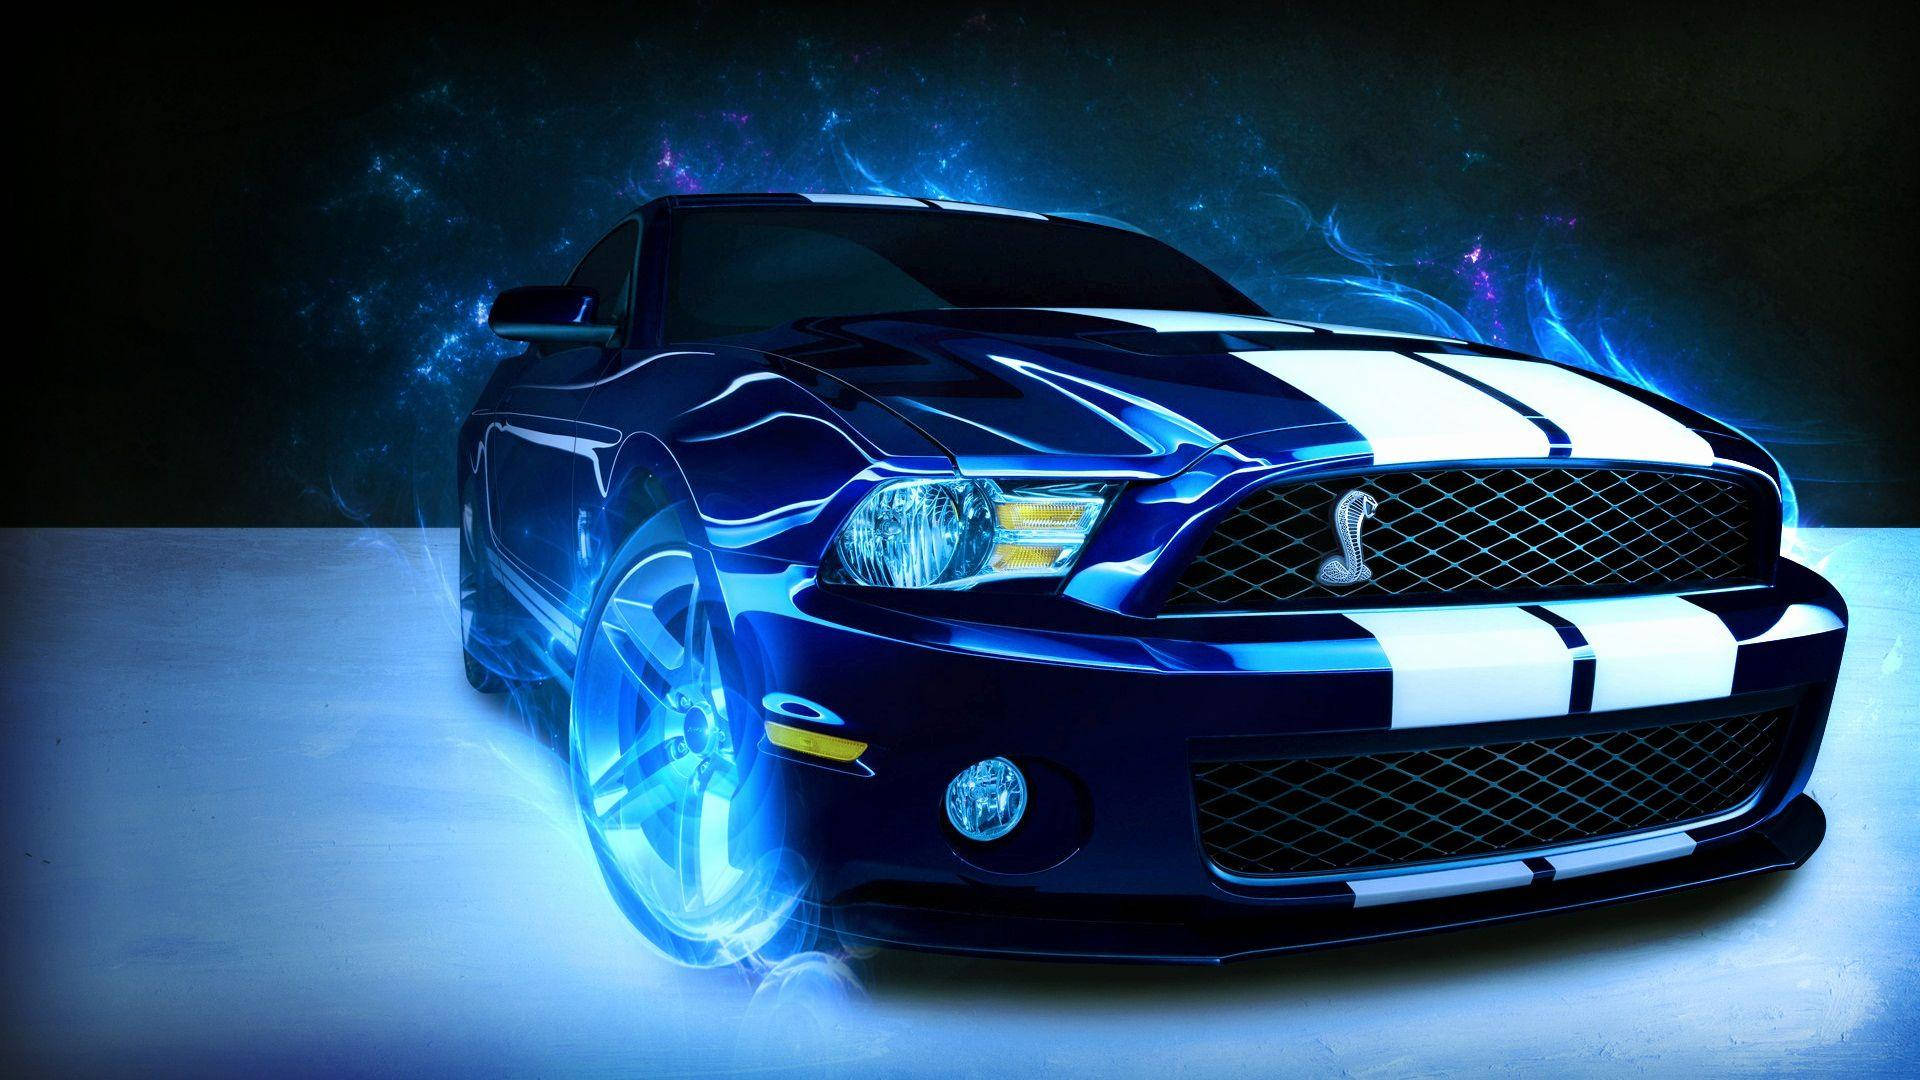 Blue Fire Car With Stripes